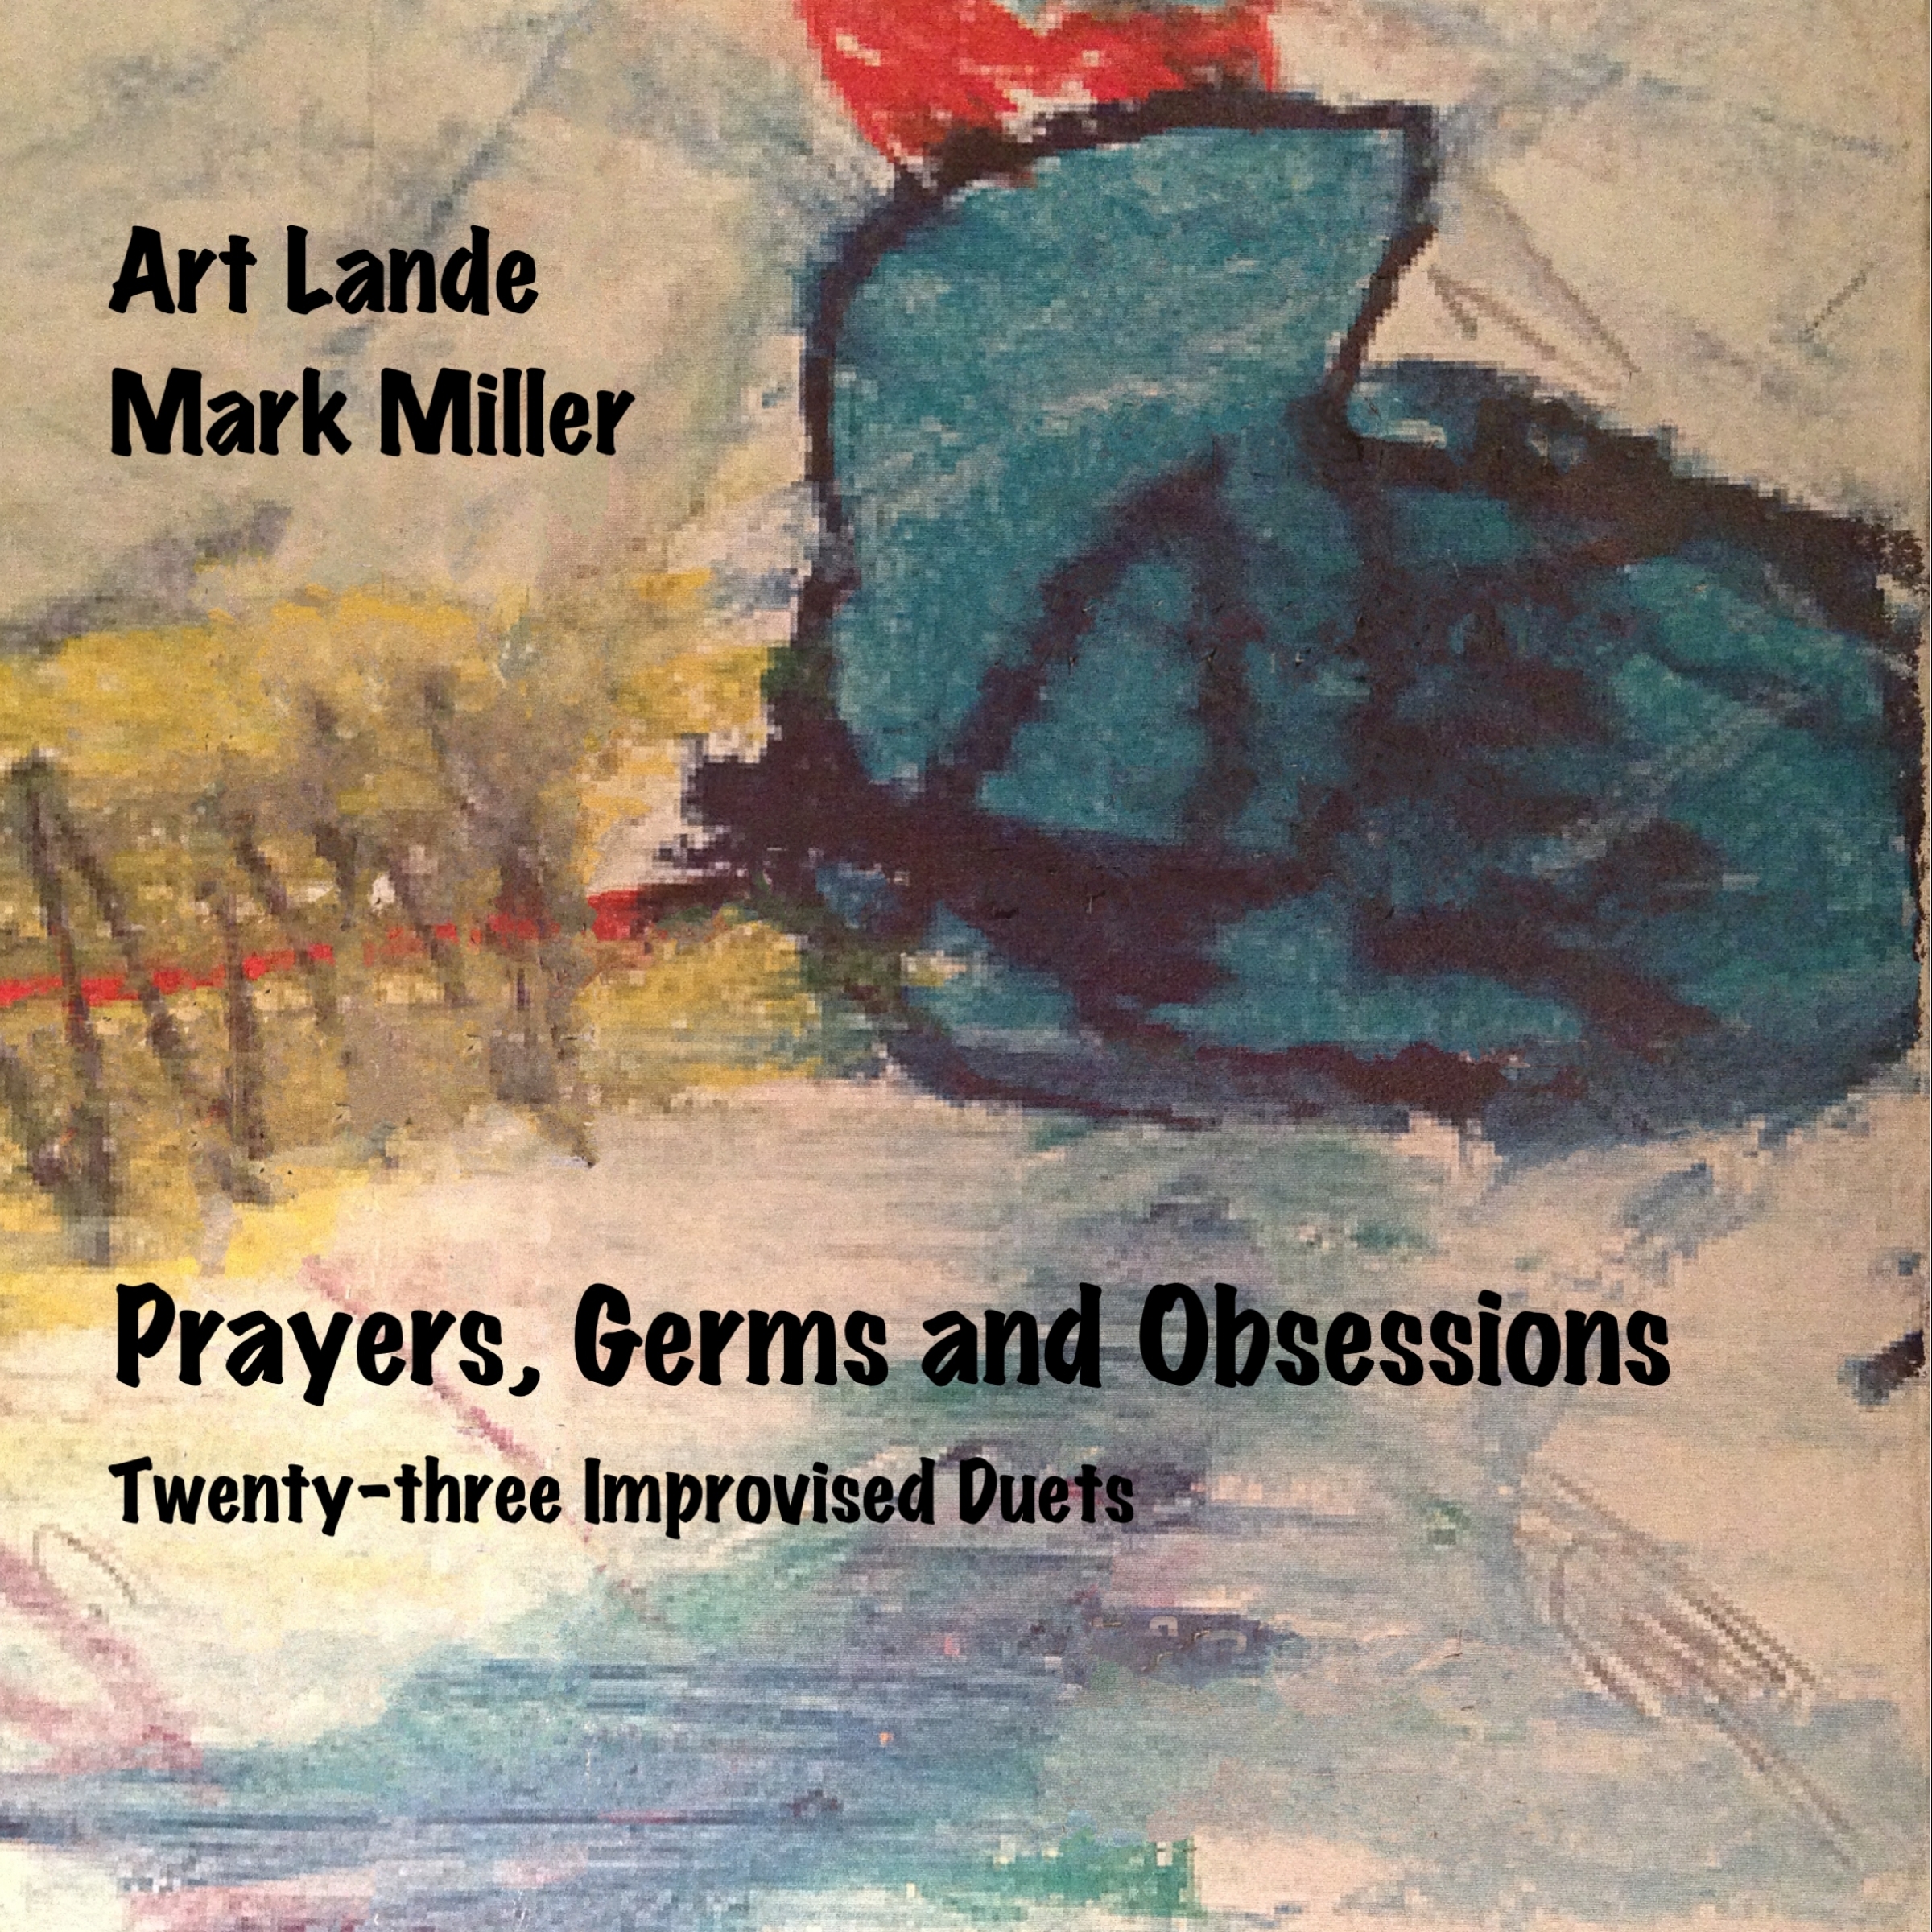 ART LANDE - Art Lande and Mark Miller: Prayers, Germs and Obsessions cover 